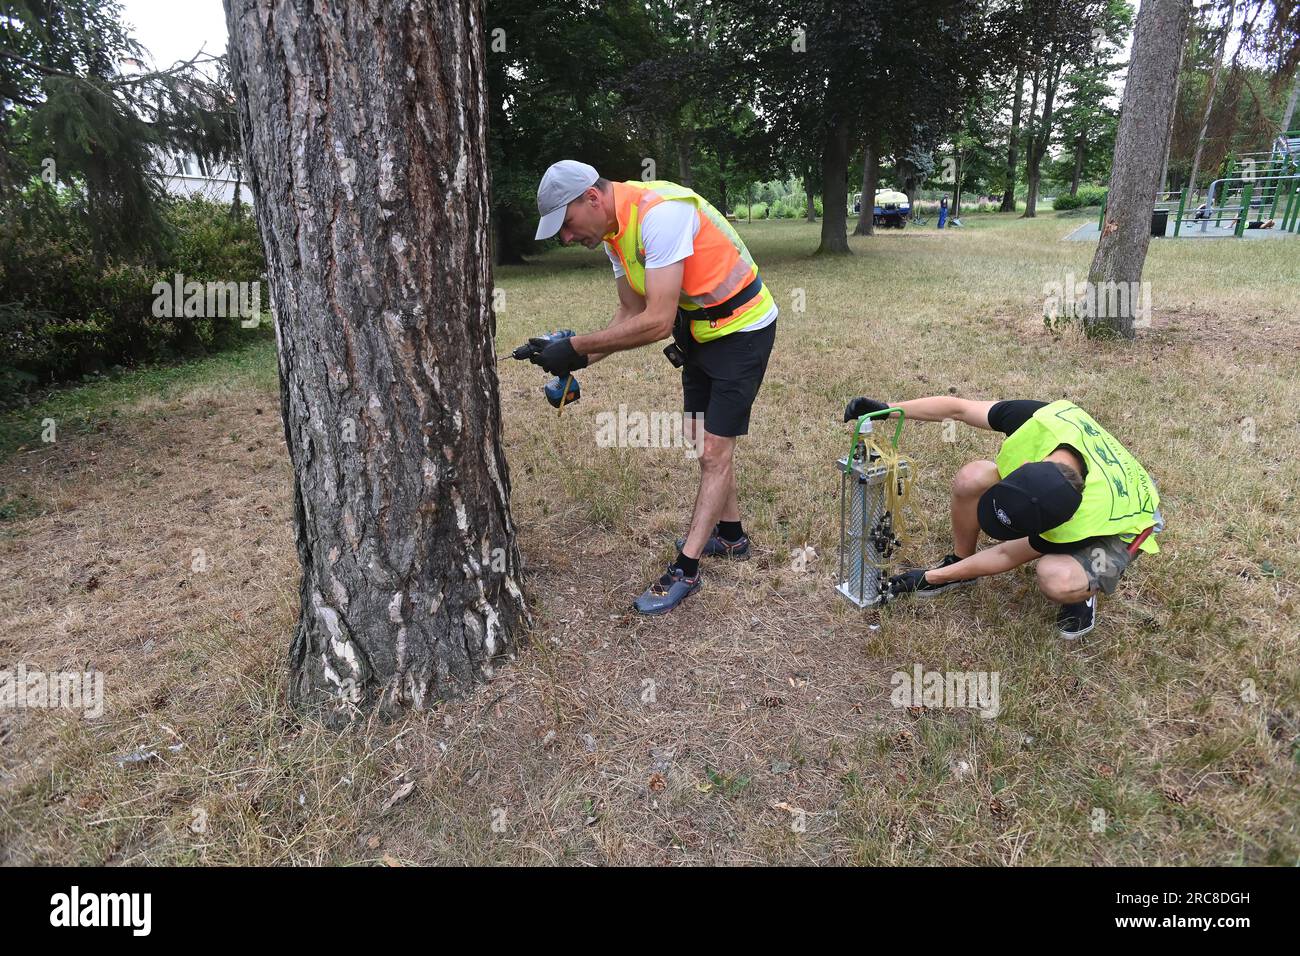 Certified arborist Vaclav Drhlik (left) and his son Filip are about to treat a pine tree against the parasitic fungal disease Lophodermium seditiosum in Kolarovy sady, Prostejov, Czech Republic, July 13, 2023. The town hall has allocated a total of 61 trees in the town for professional treatment. In addition to pine trees, which are treated with a nutrient solution of phosphorus, potassium and trace elements, they also treat Aesculus species infested with the horse-chestnut leaf miner (Cameraria ohridella) using insecticides. Both methods are environmentally friendly, as they are injected dire Stock Photo